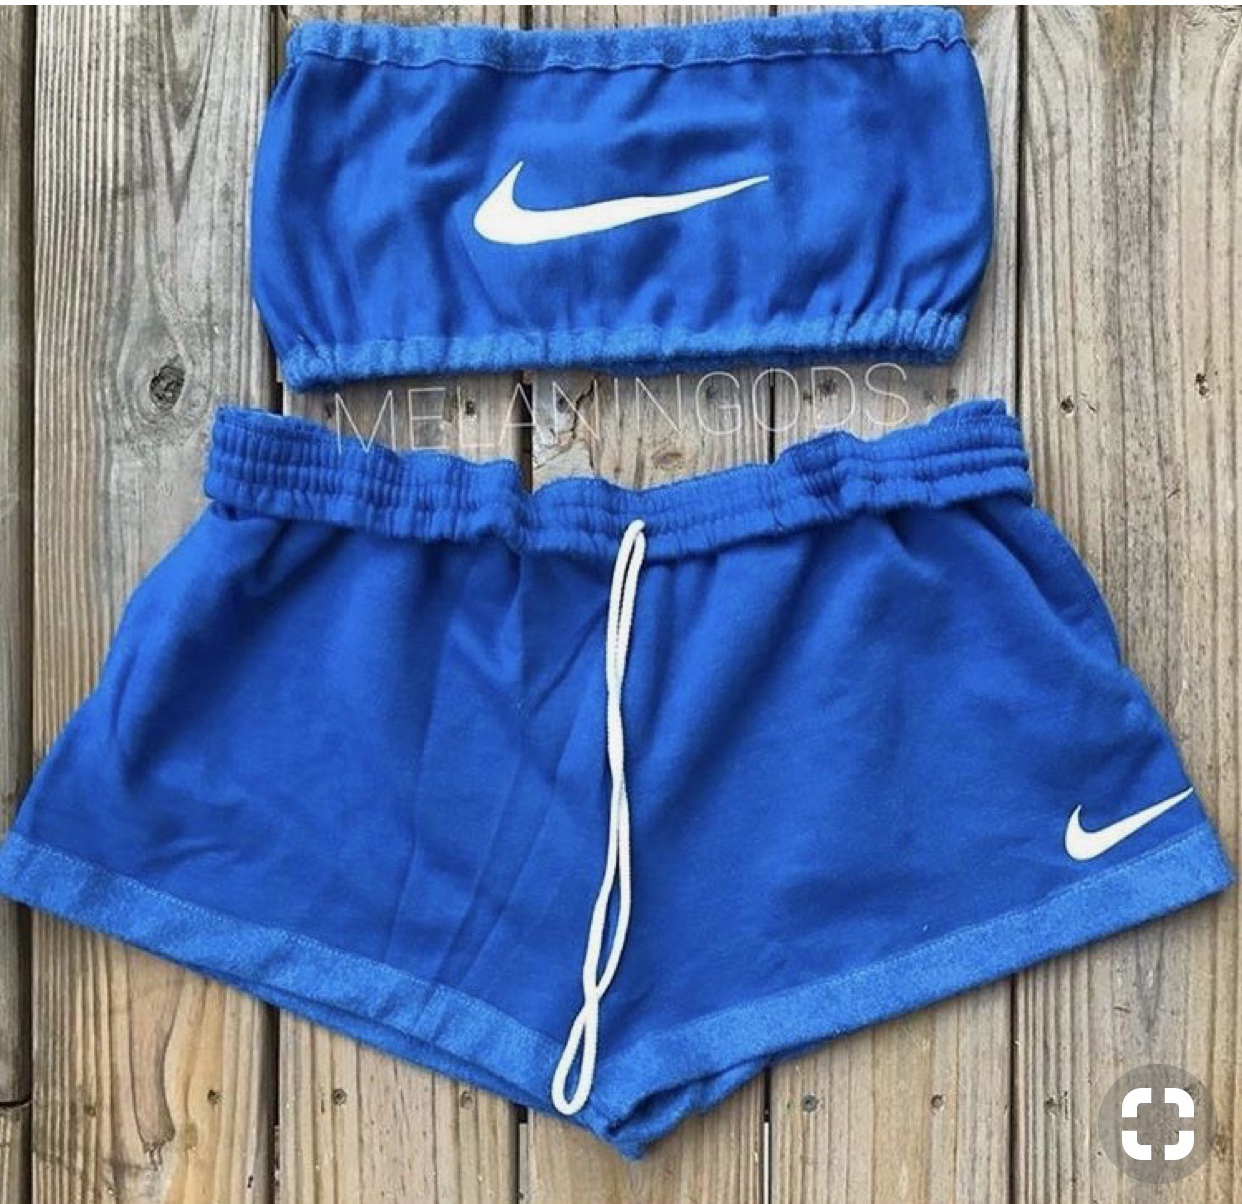 nike shorts and top set women's